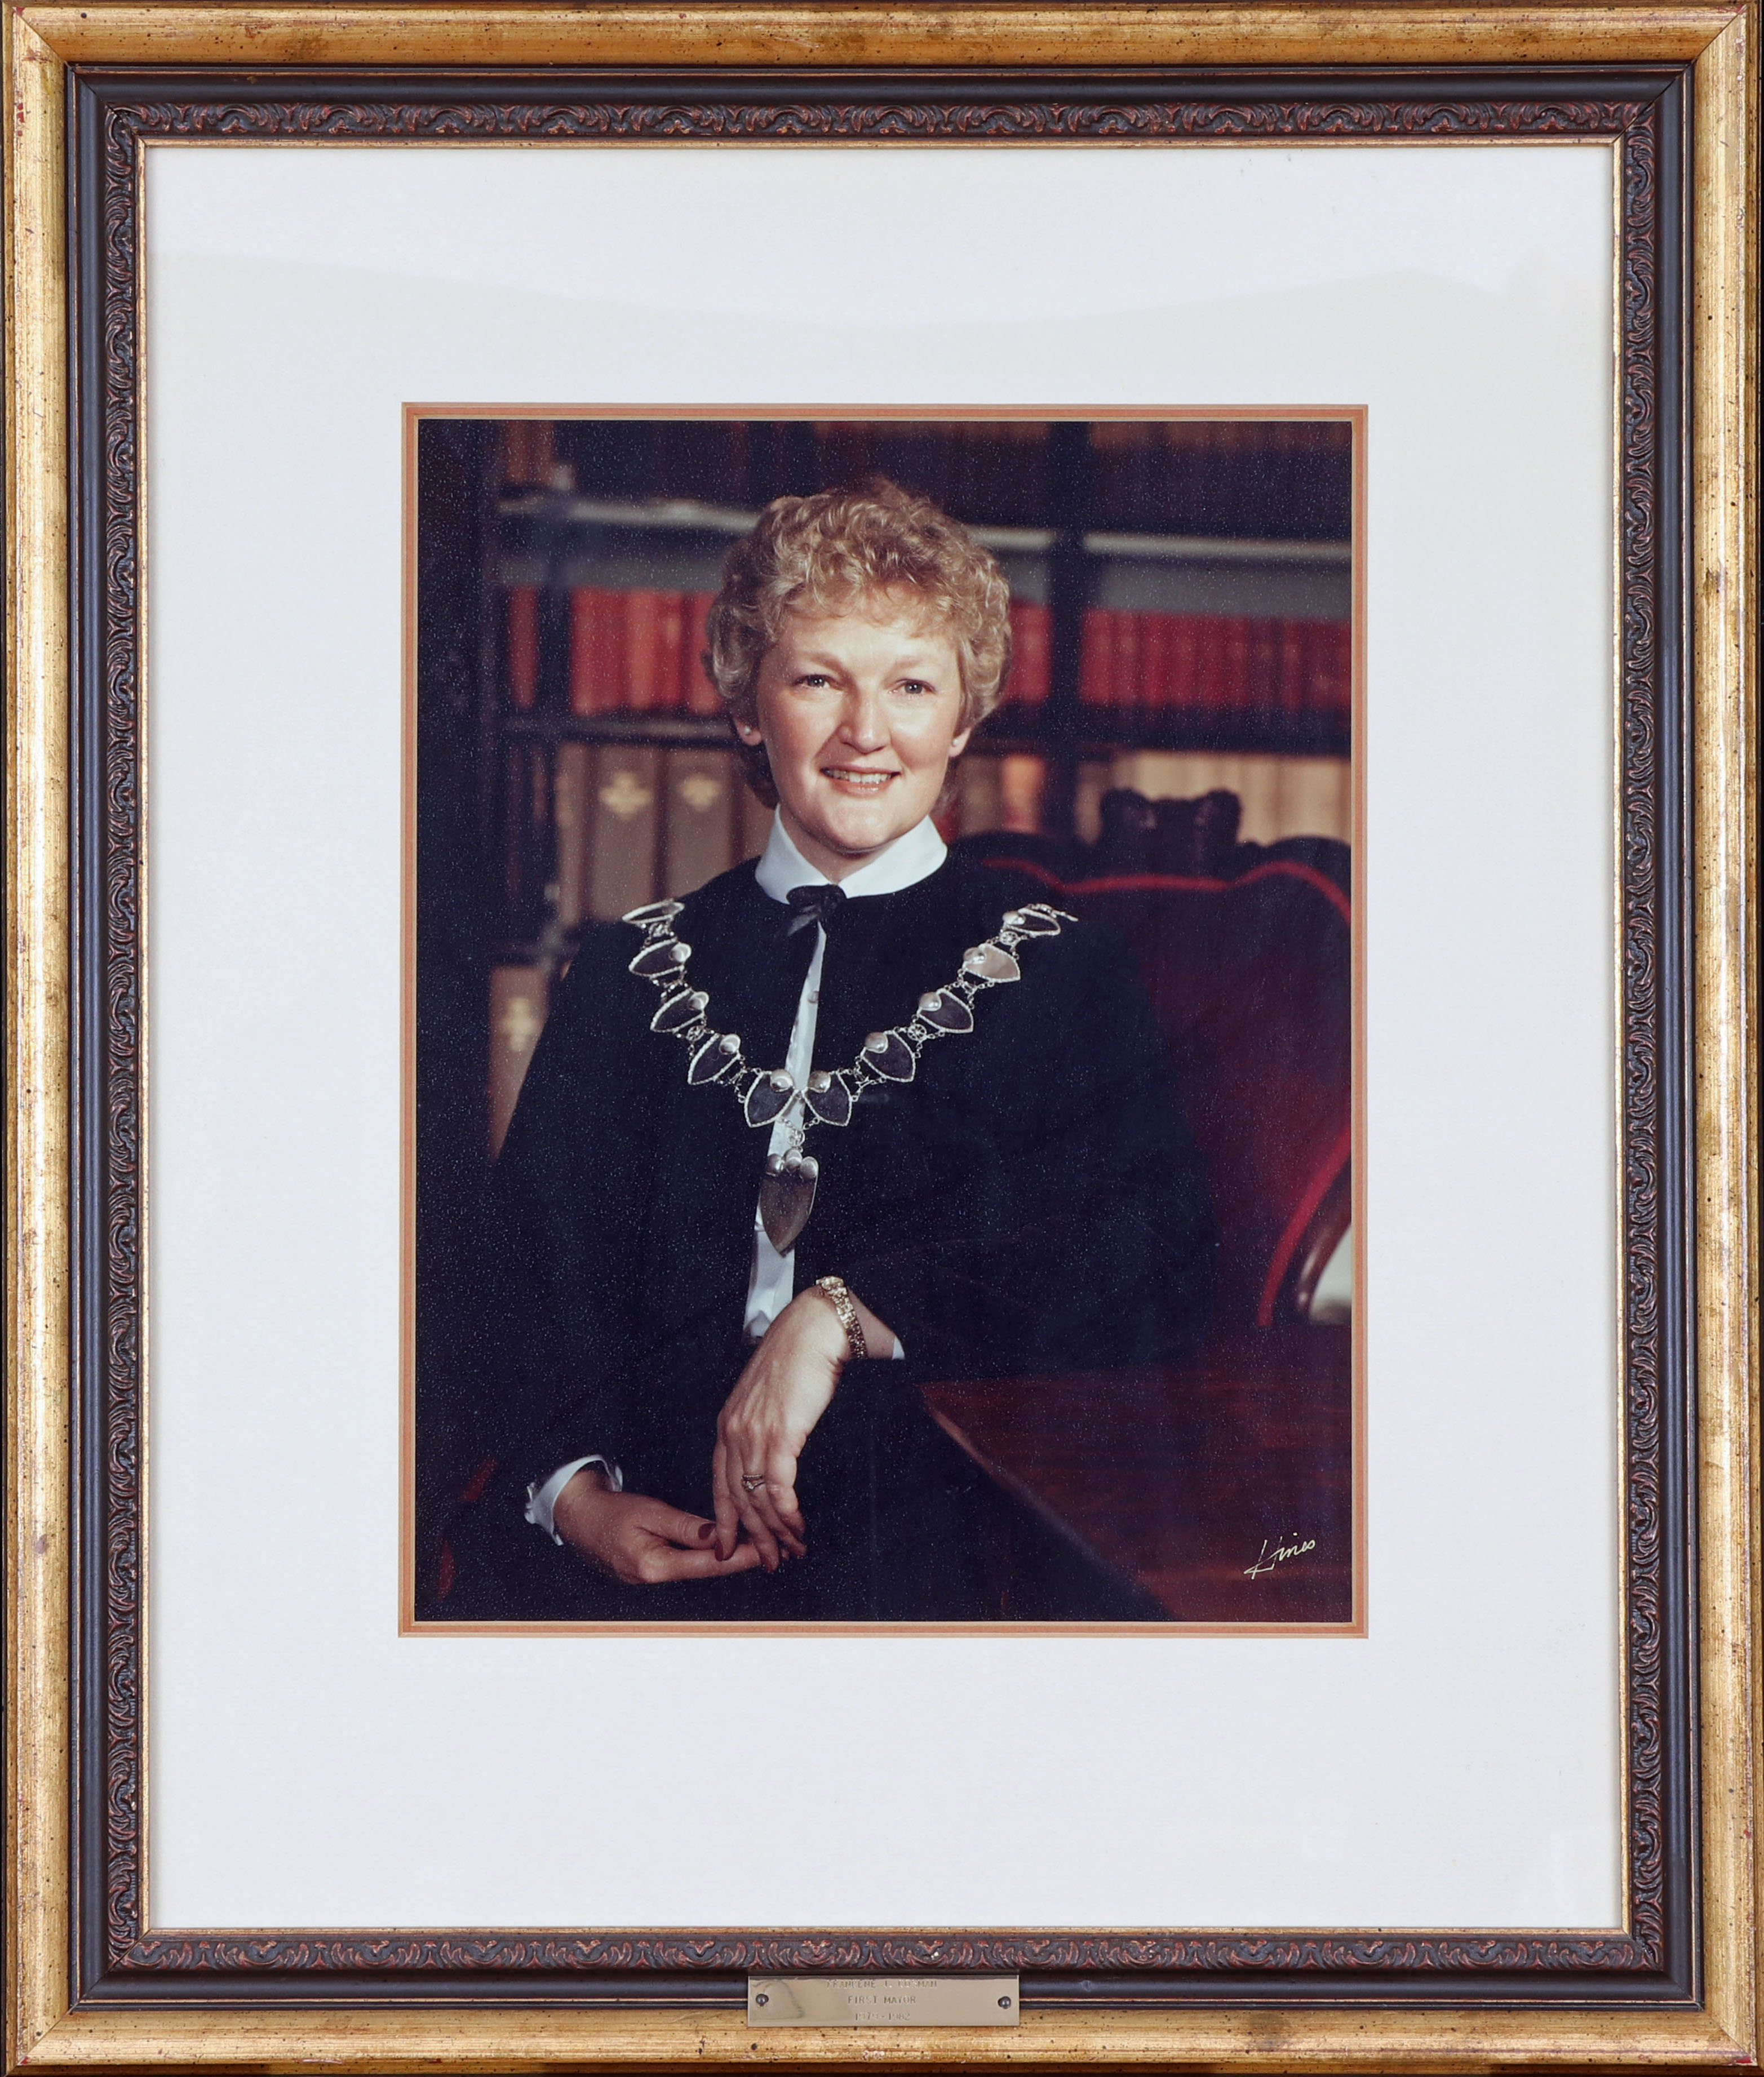 Coloured photograph of a woman wearing a dark blue robe and the mayor's chain of office